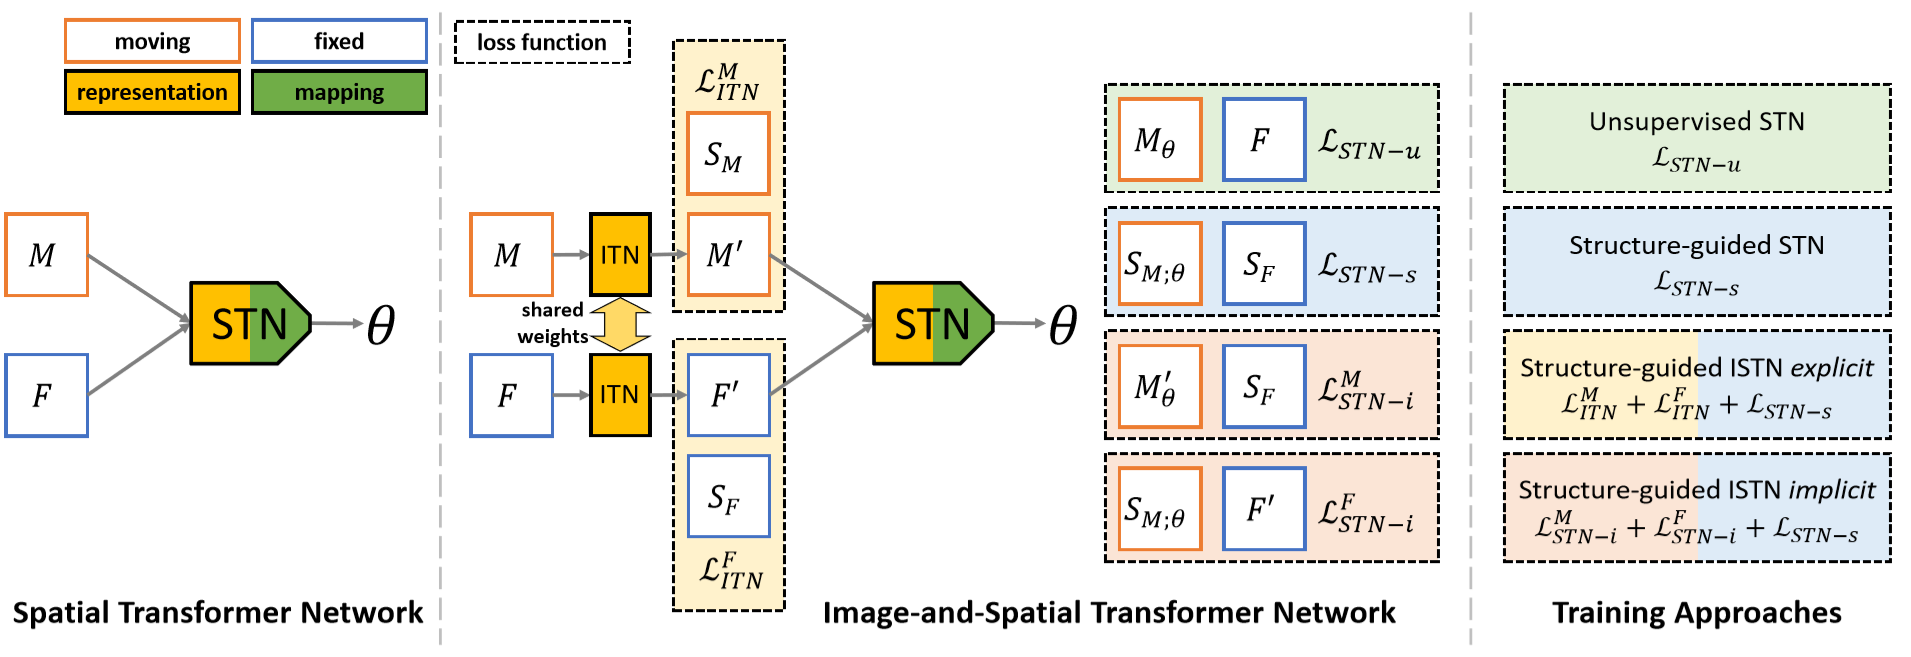 Image-and-Spatial Transformer Networks